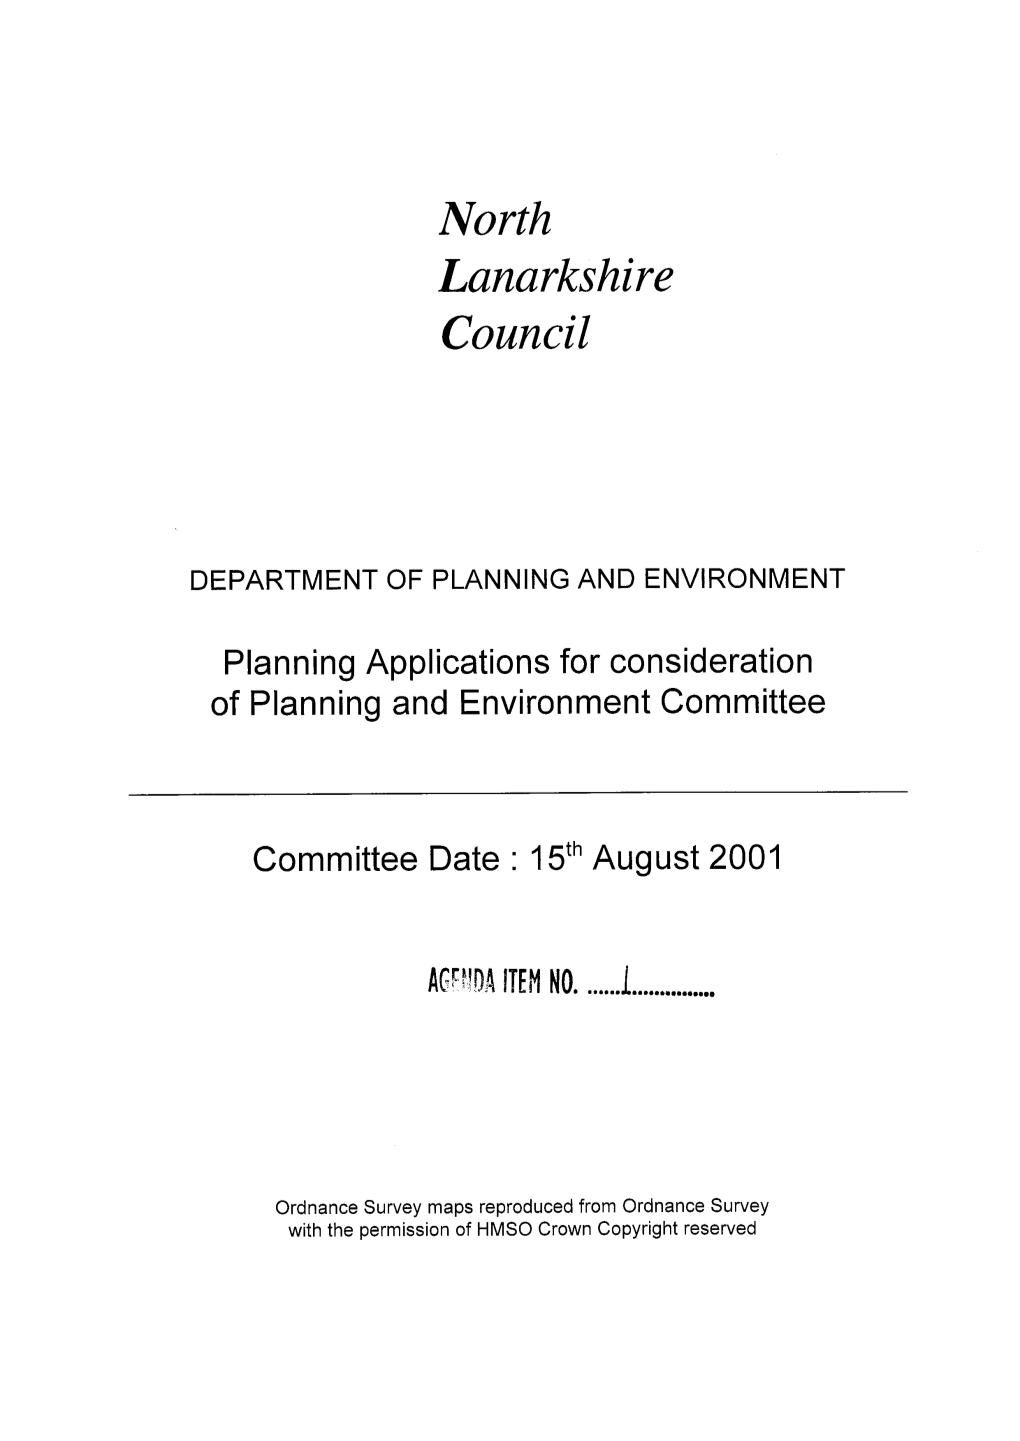 Department of Planning and Environment